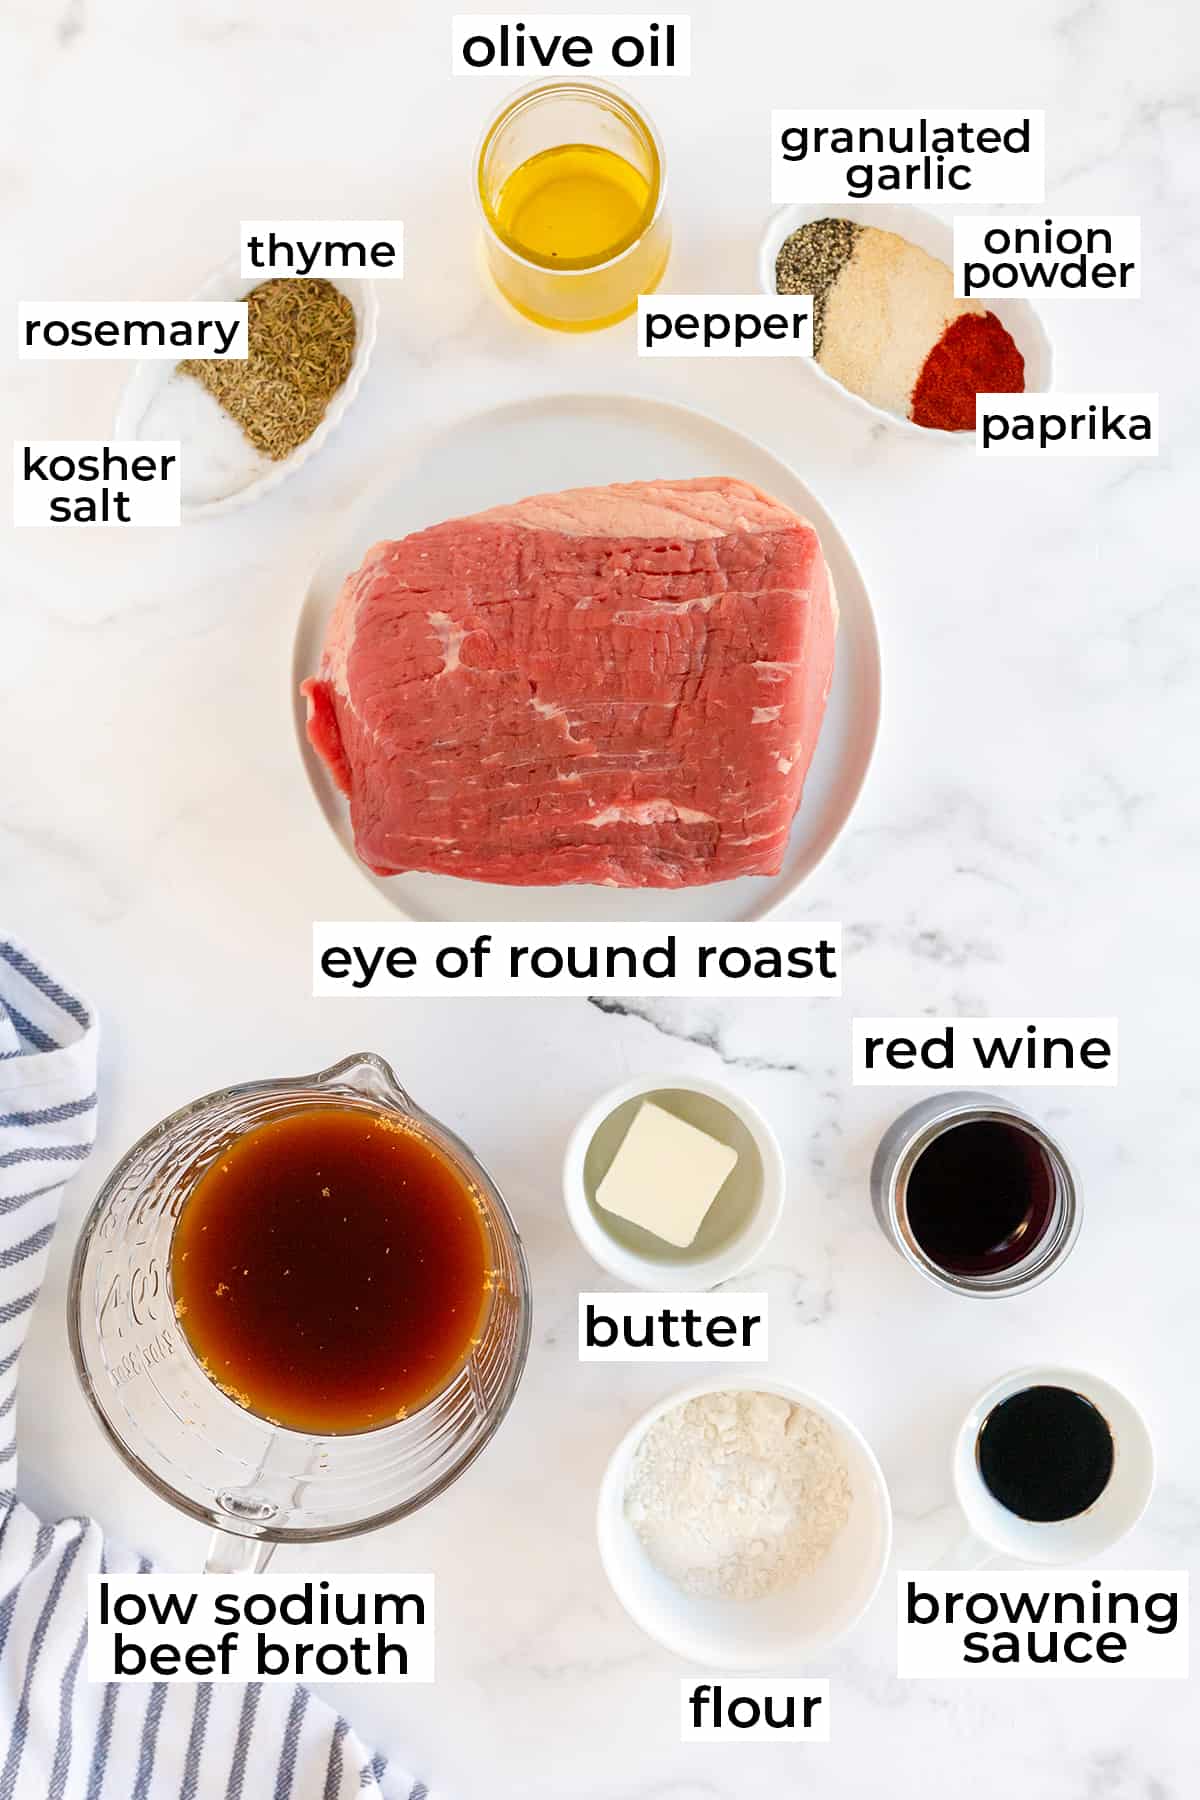 The ingredients needed to make Eye of Round Roast Beef with Gravy